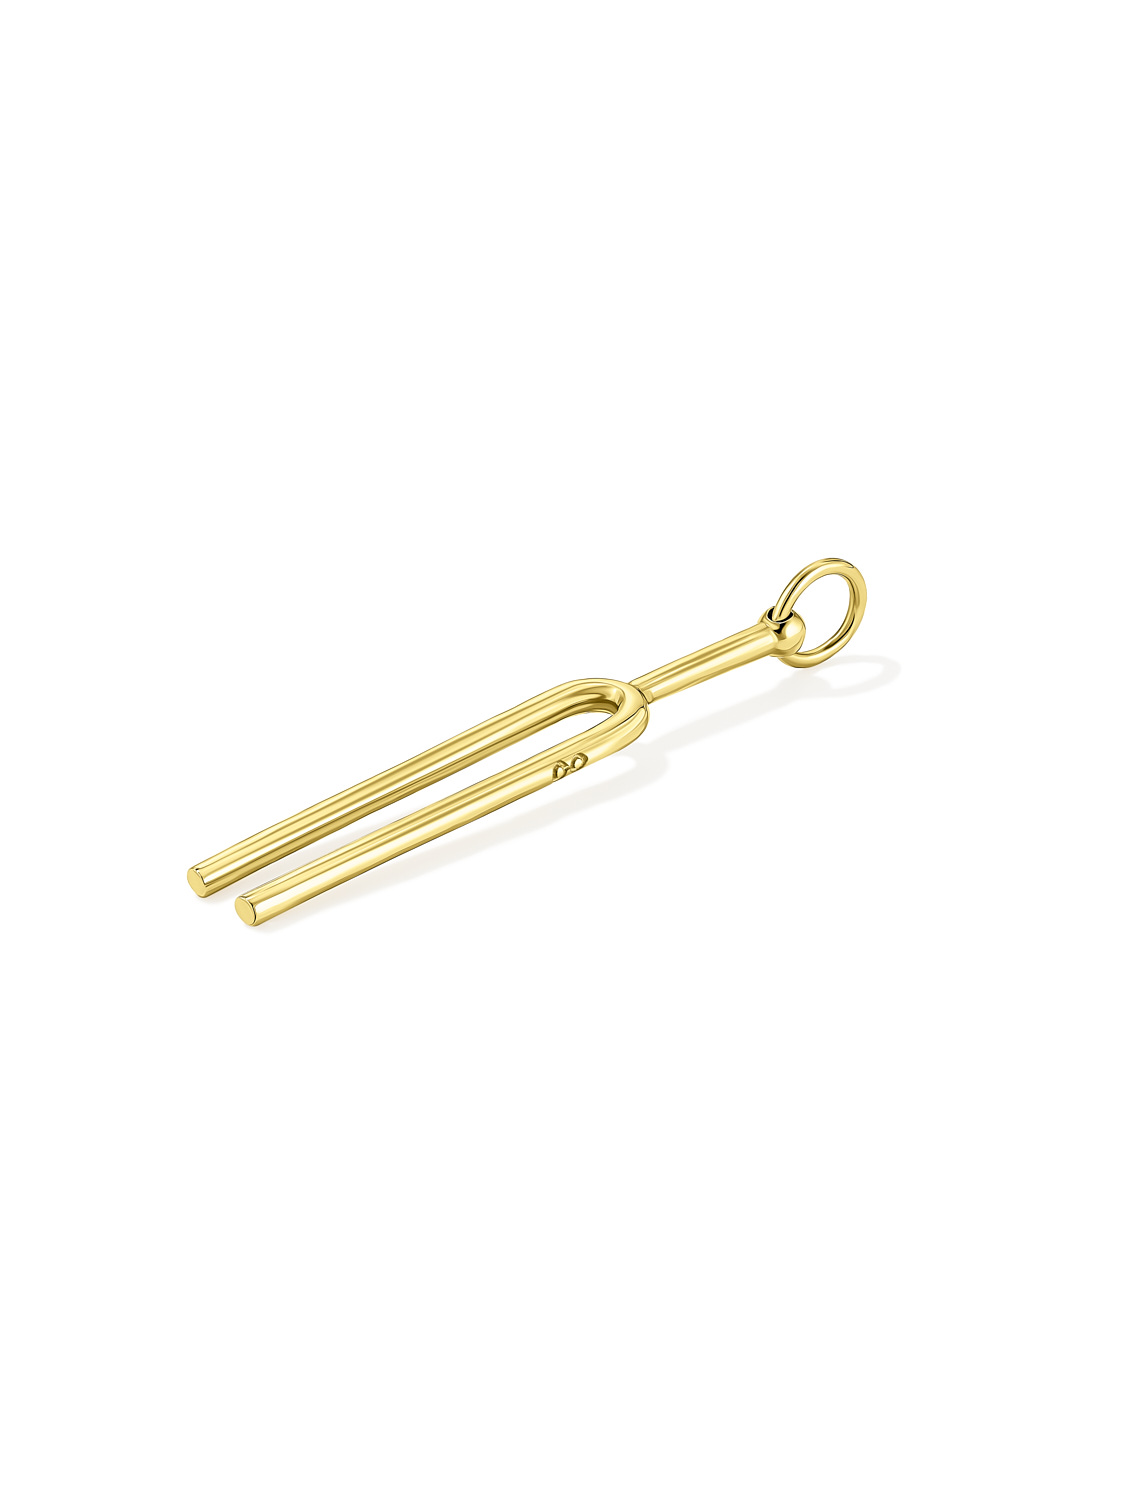 THE PITCHFORK TRINKET WITH GOLD PLATING  